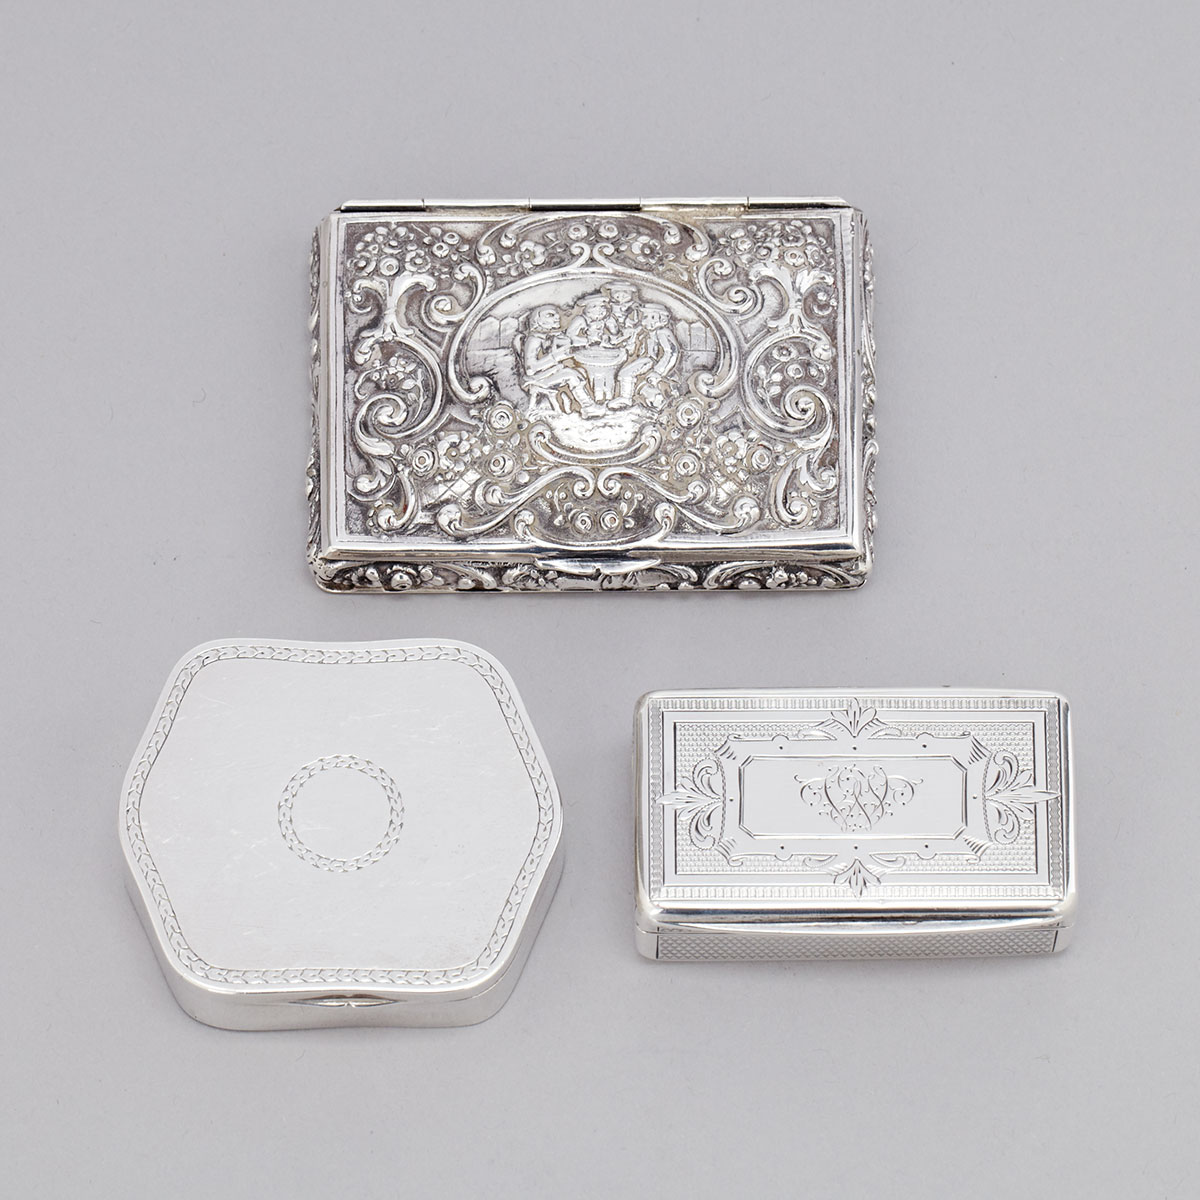 Group of Three Continental Silver Boxes, late 19th/early20th century